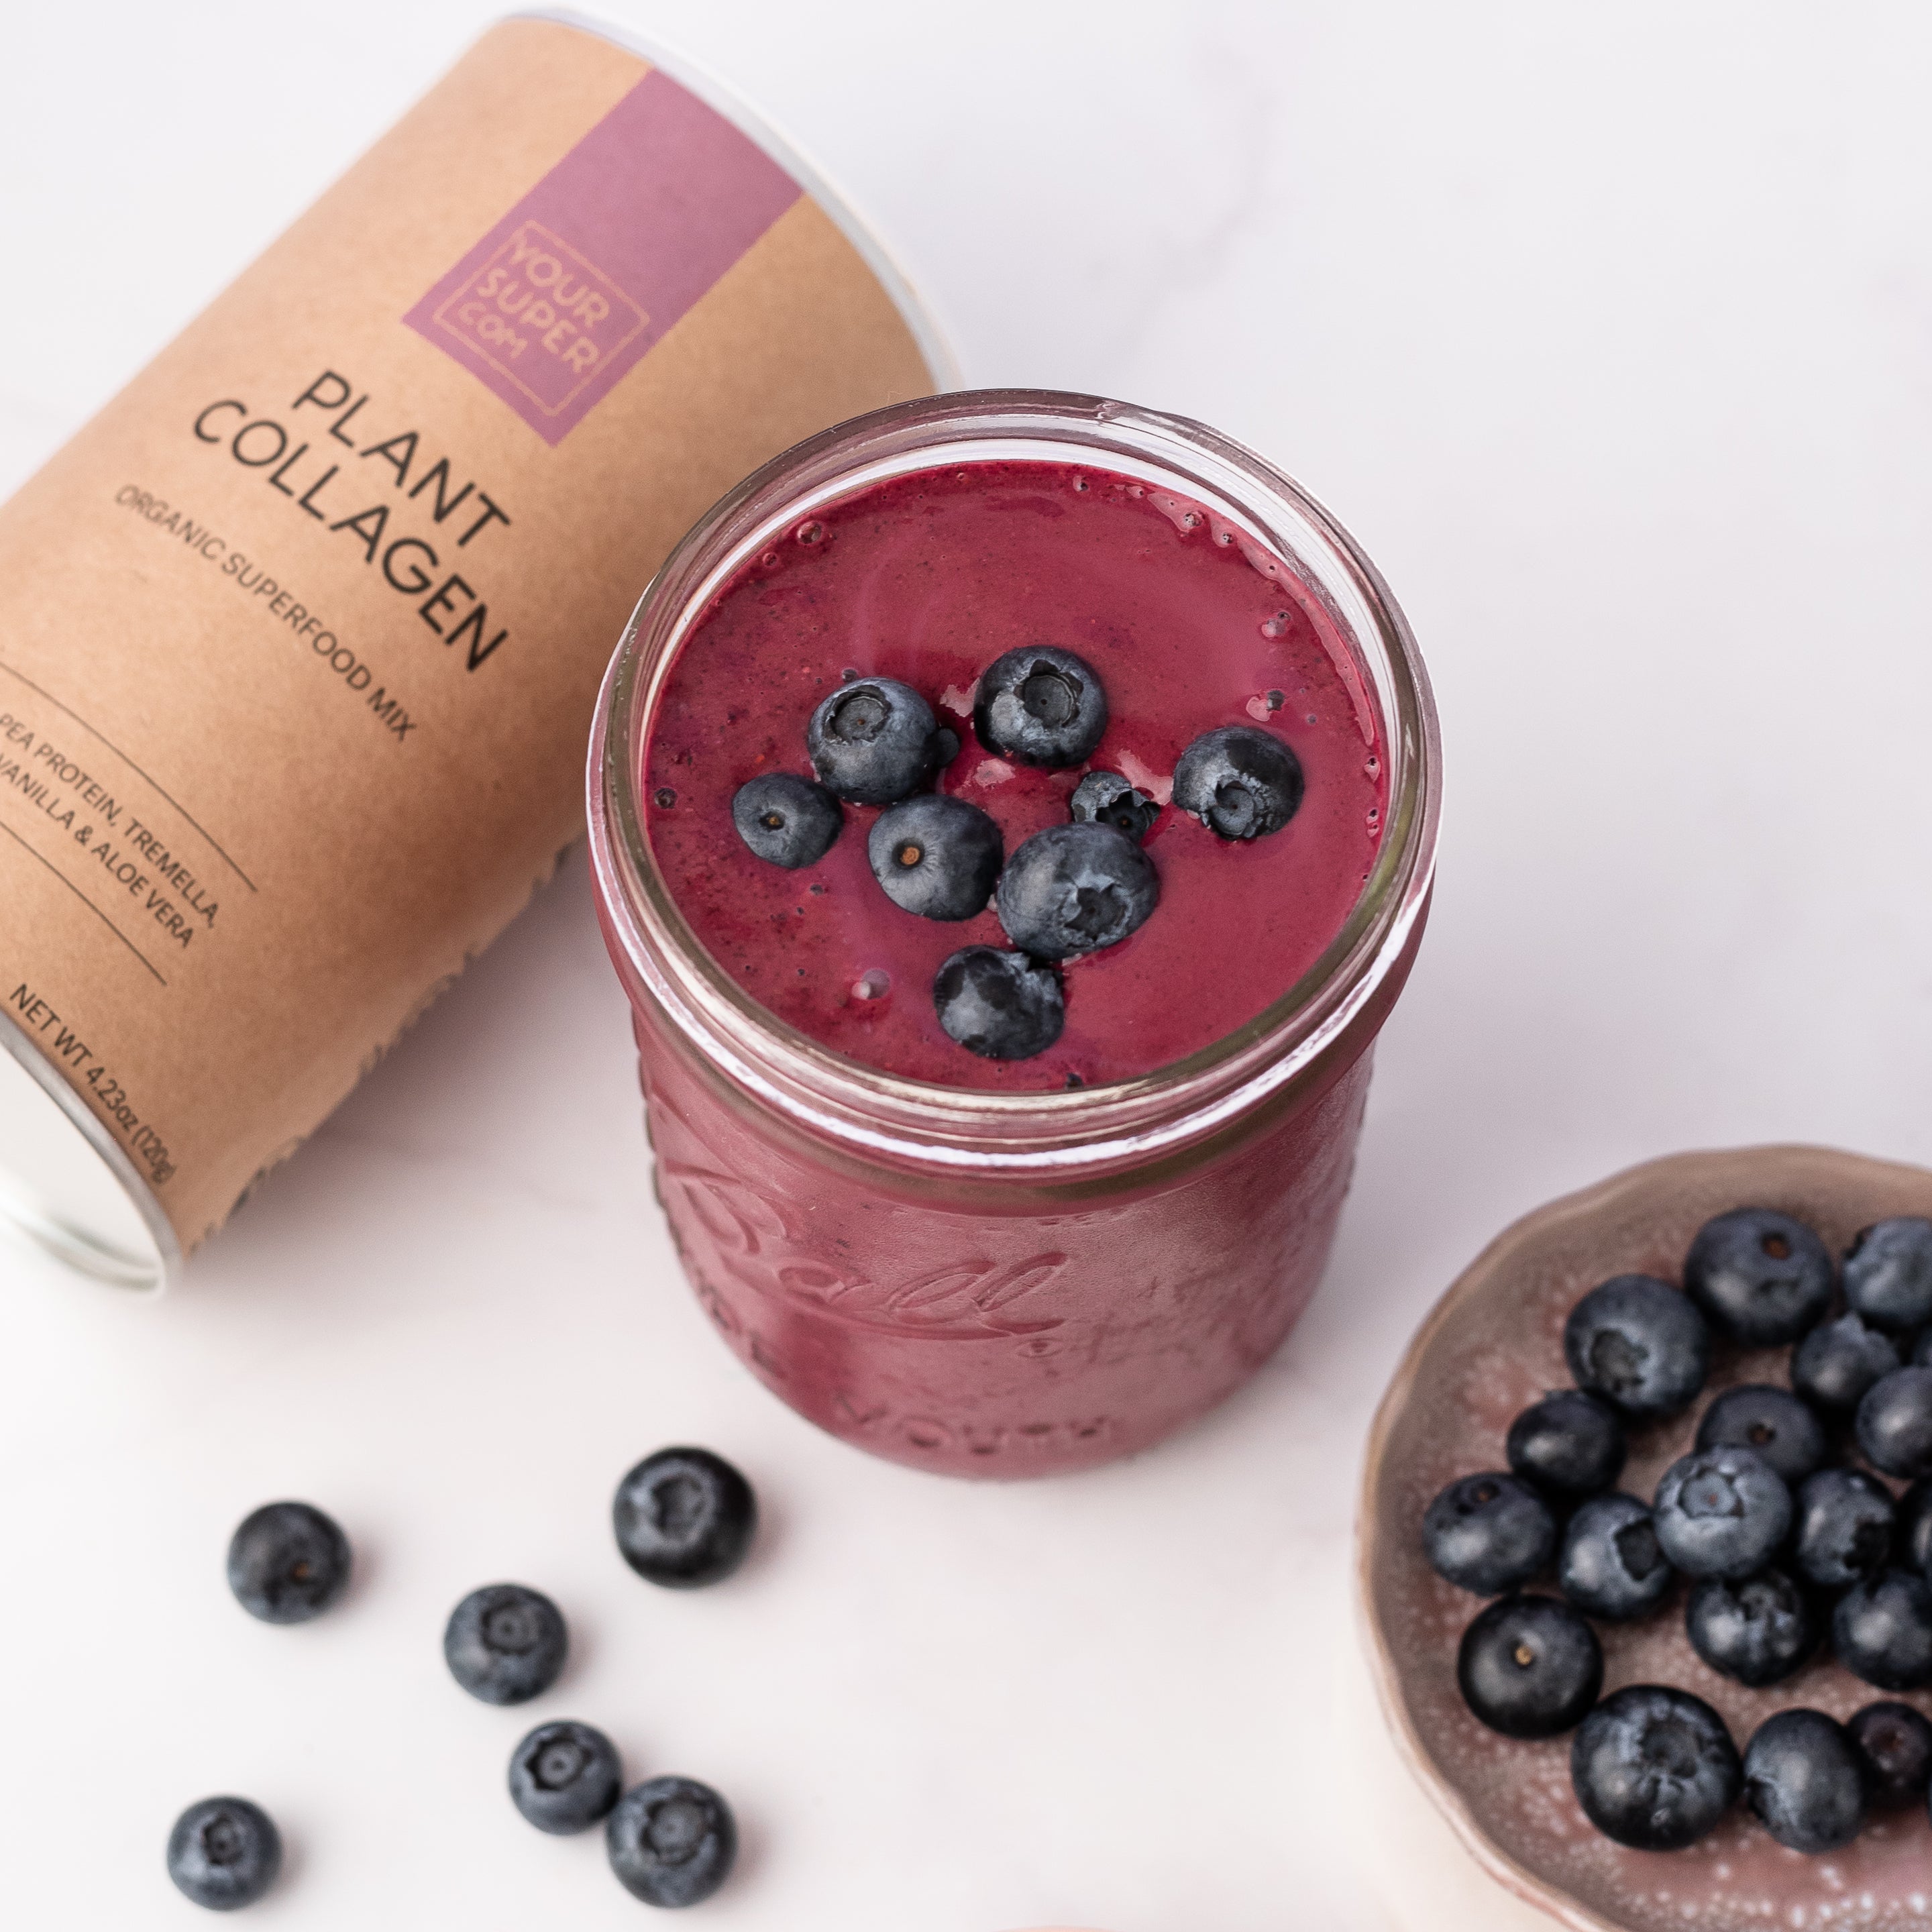 A Glowing Skin Smoothie Recipe | YOUR SUPER – Your Super